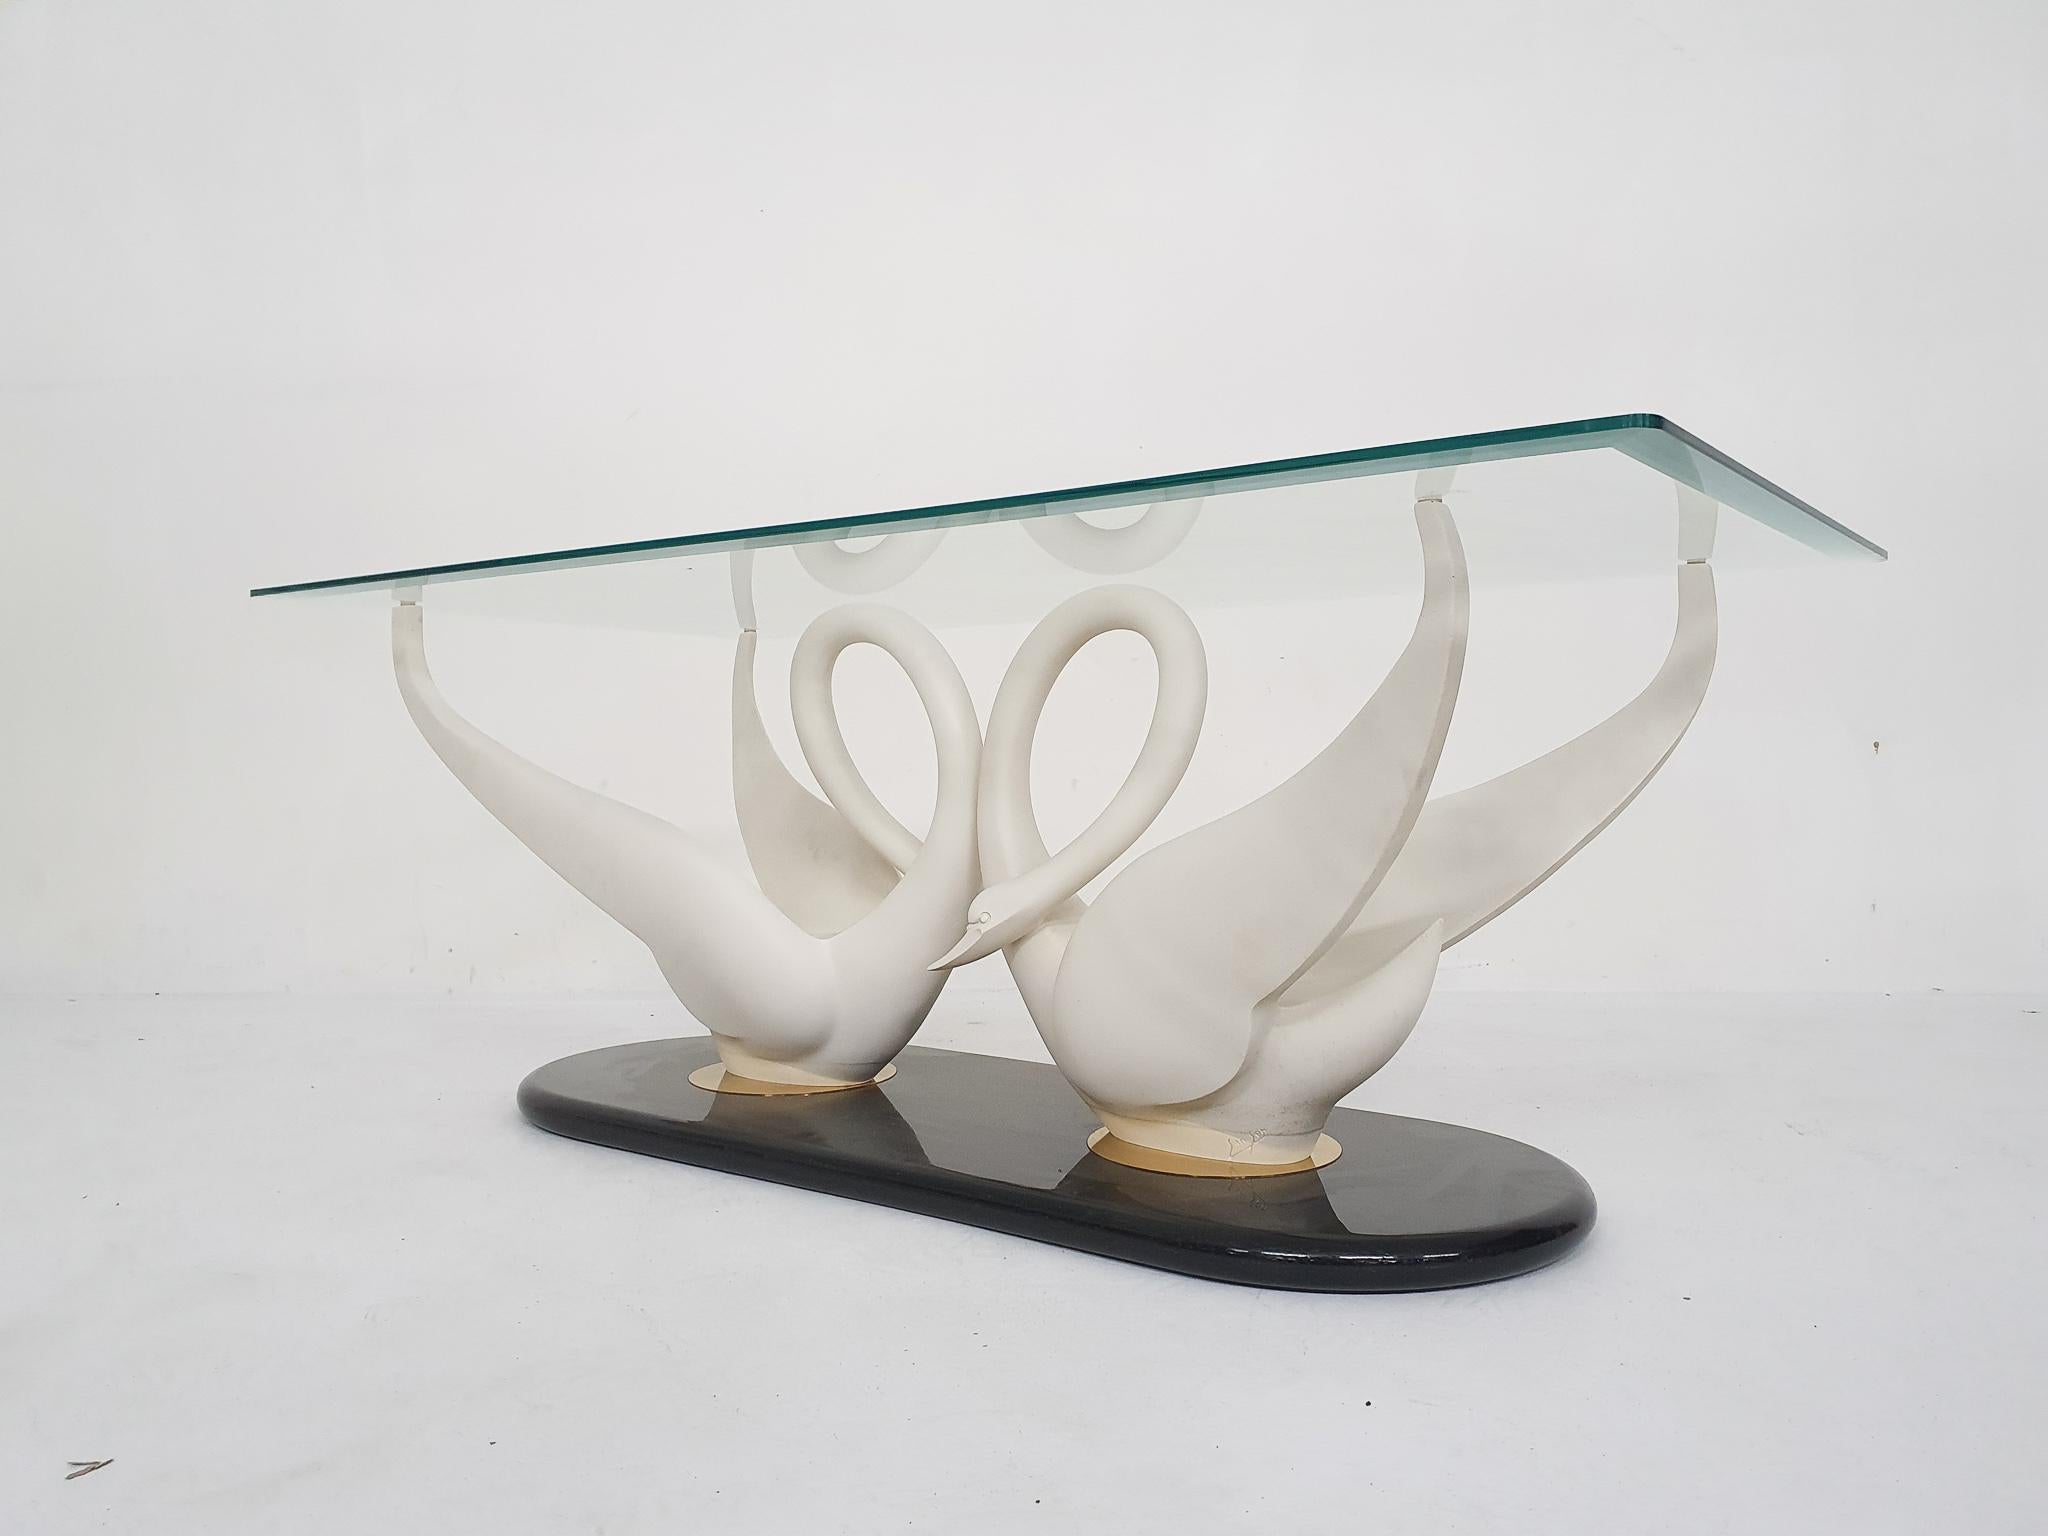 Ceramic swan sculptures with glass top. Signed by Maison Jansen.